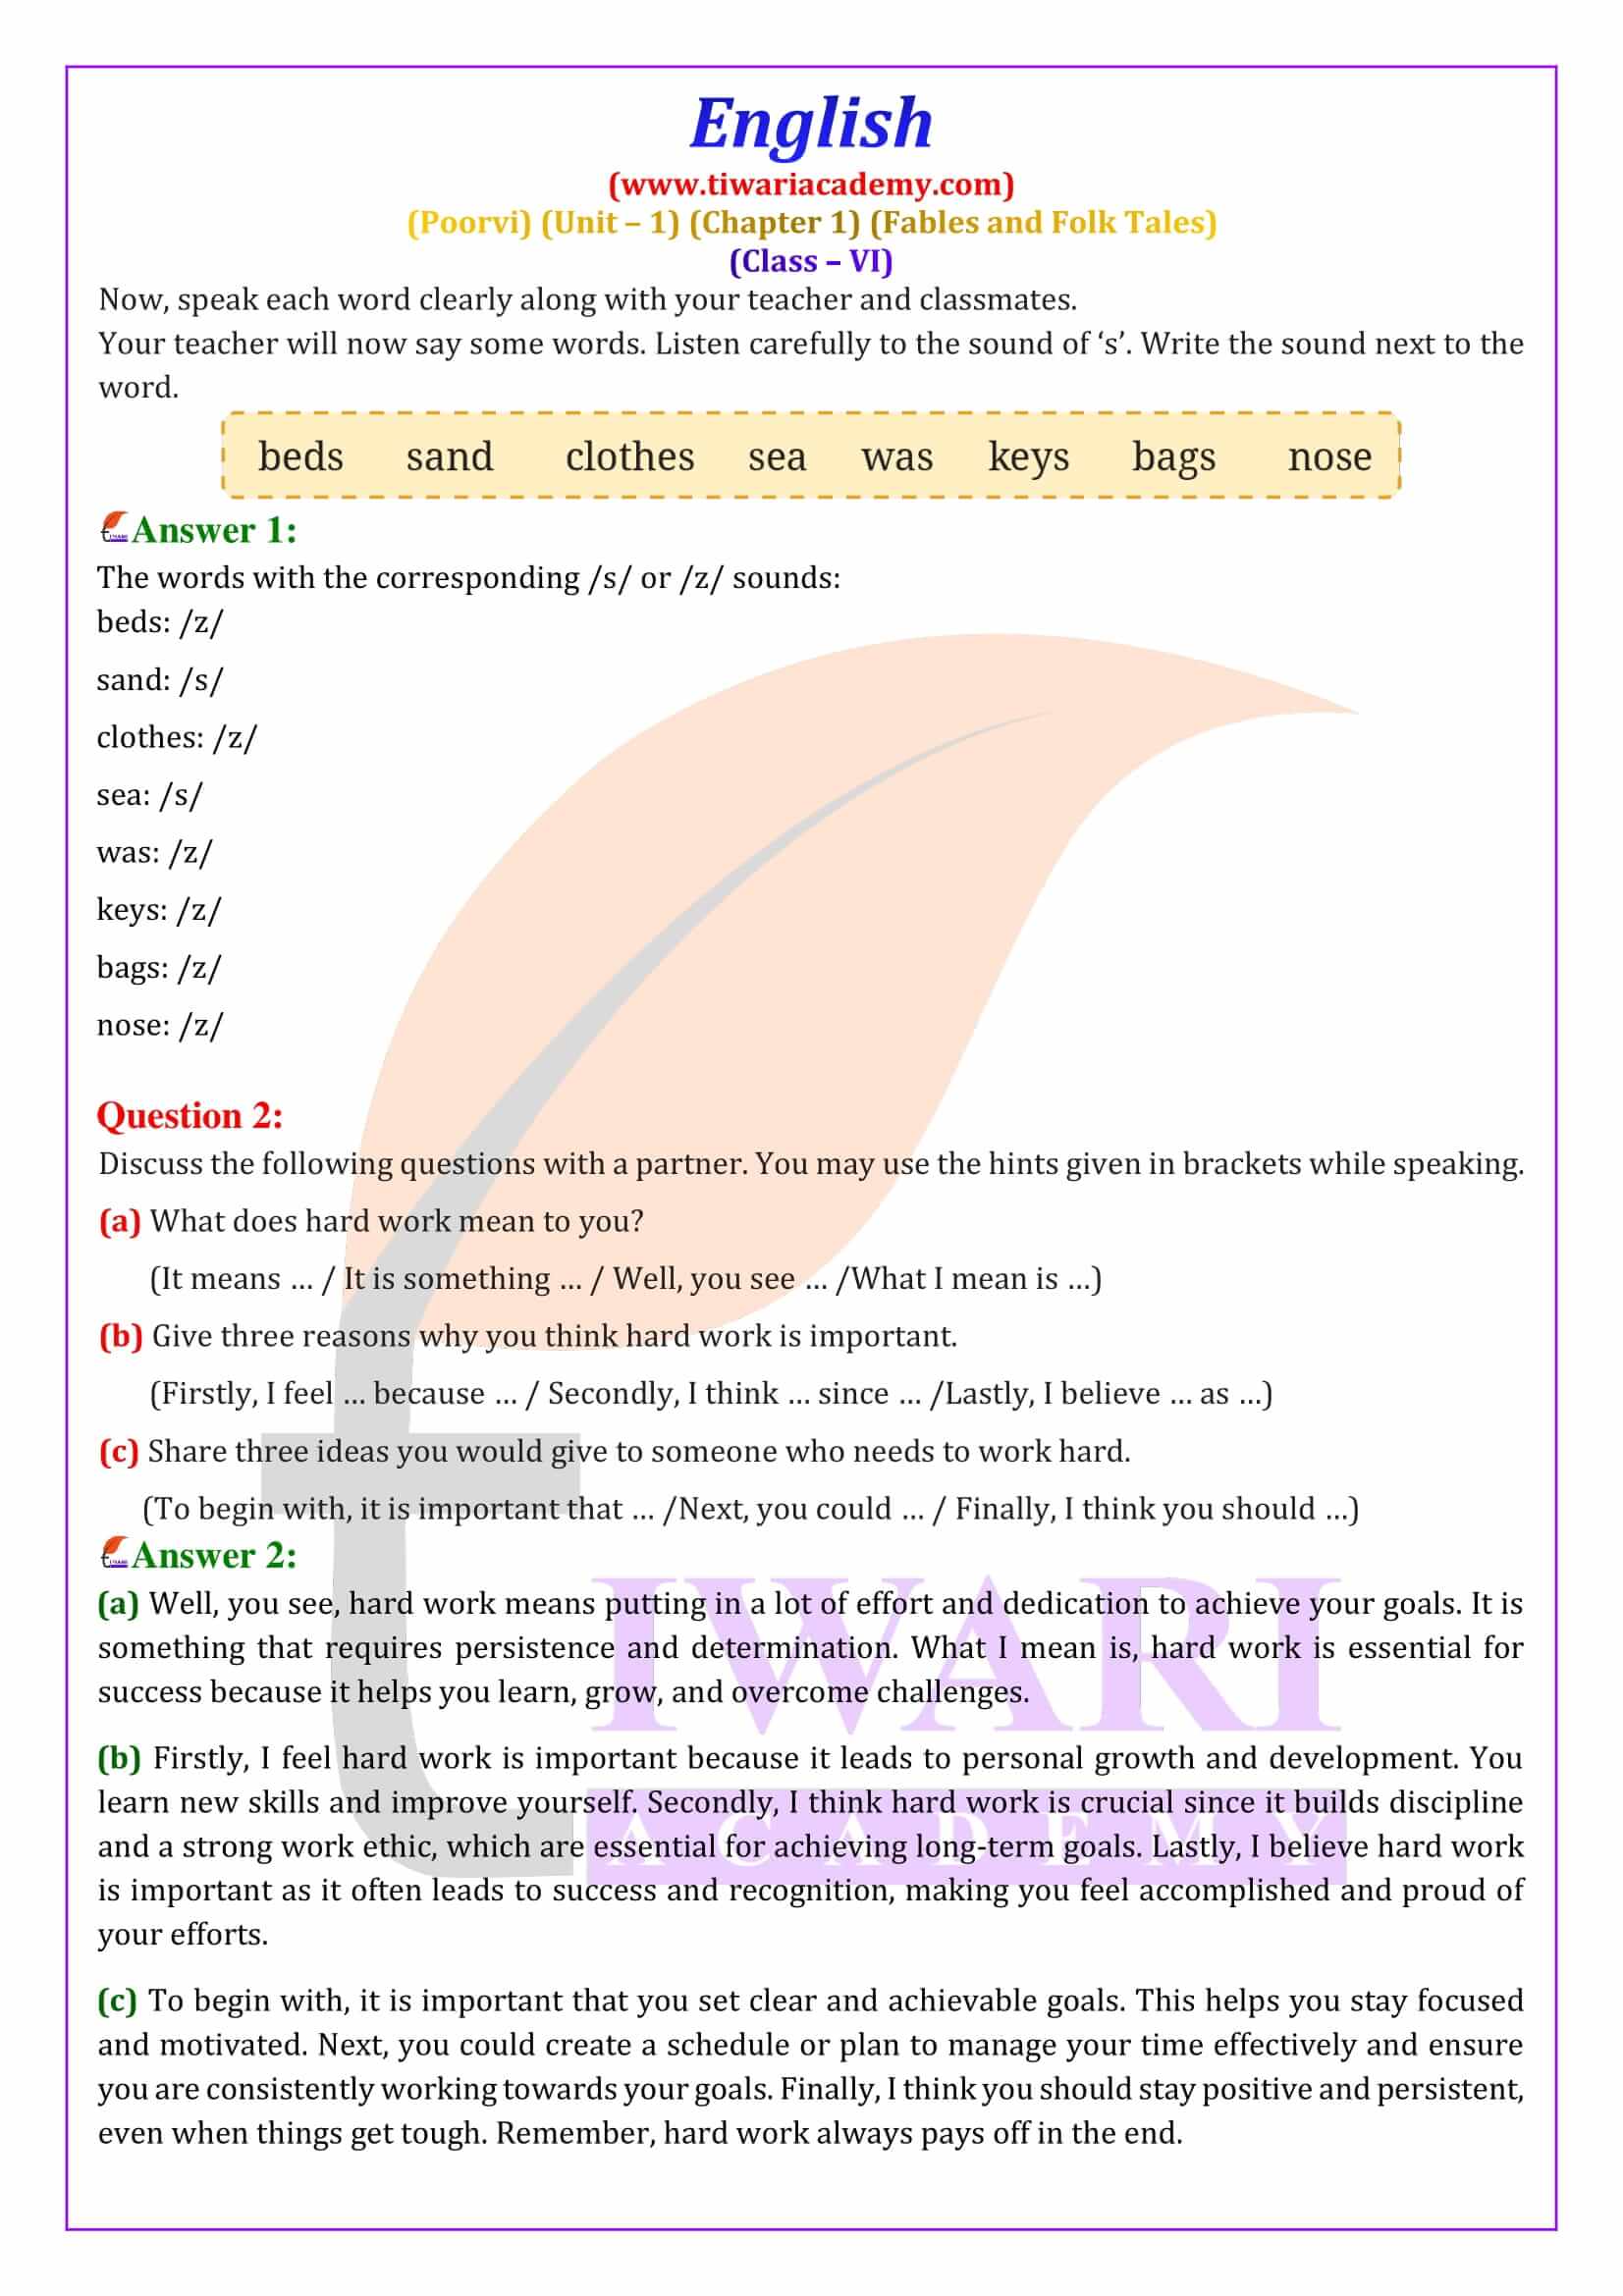 Class 6 English Poorvi Unit 1 Fables and Folk Tales Chapter 1 NCERT Solutions